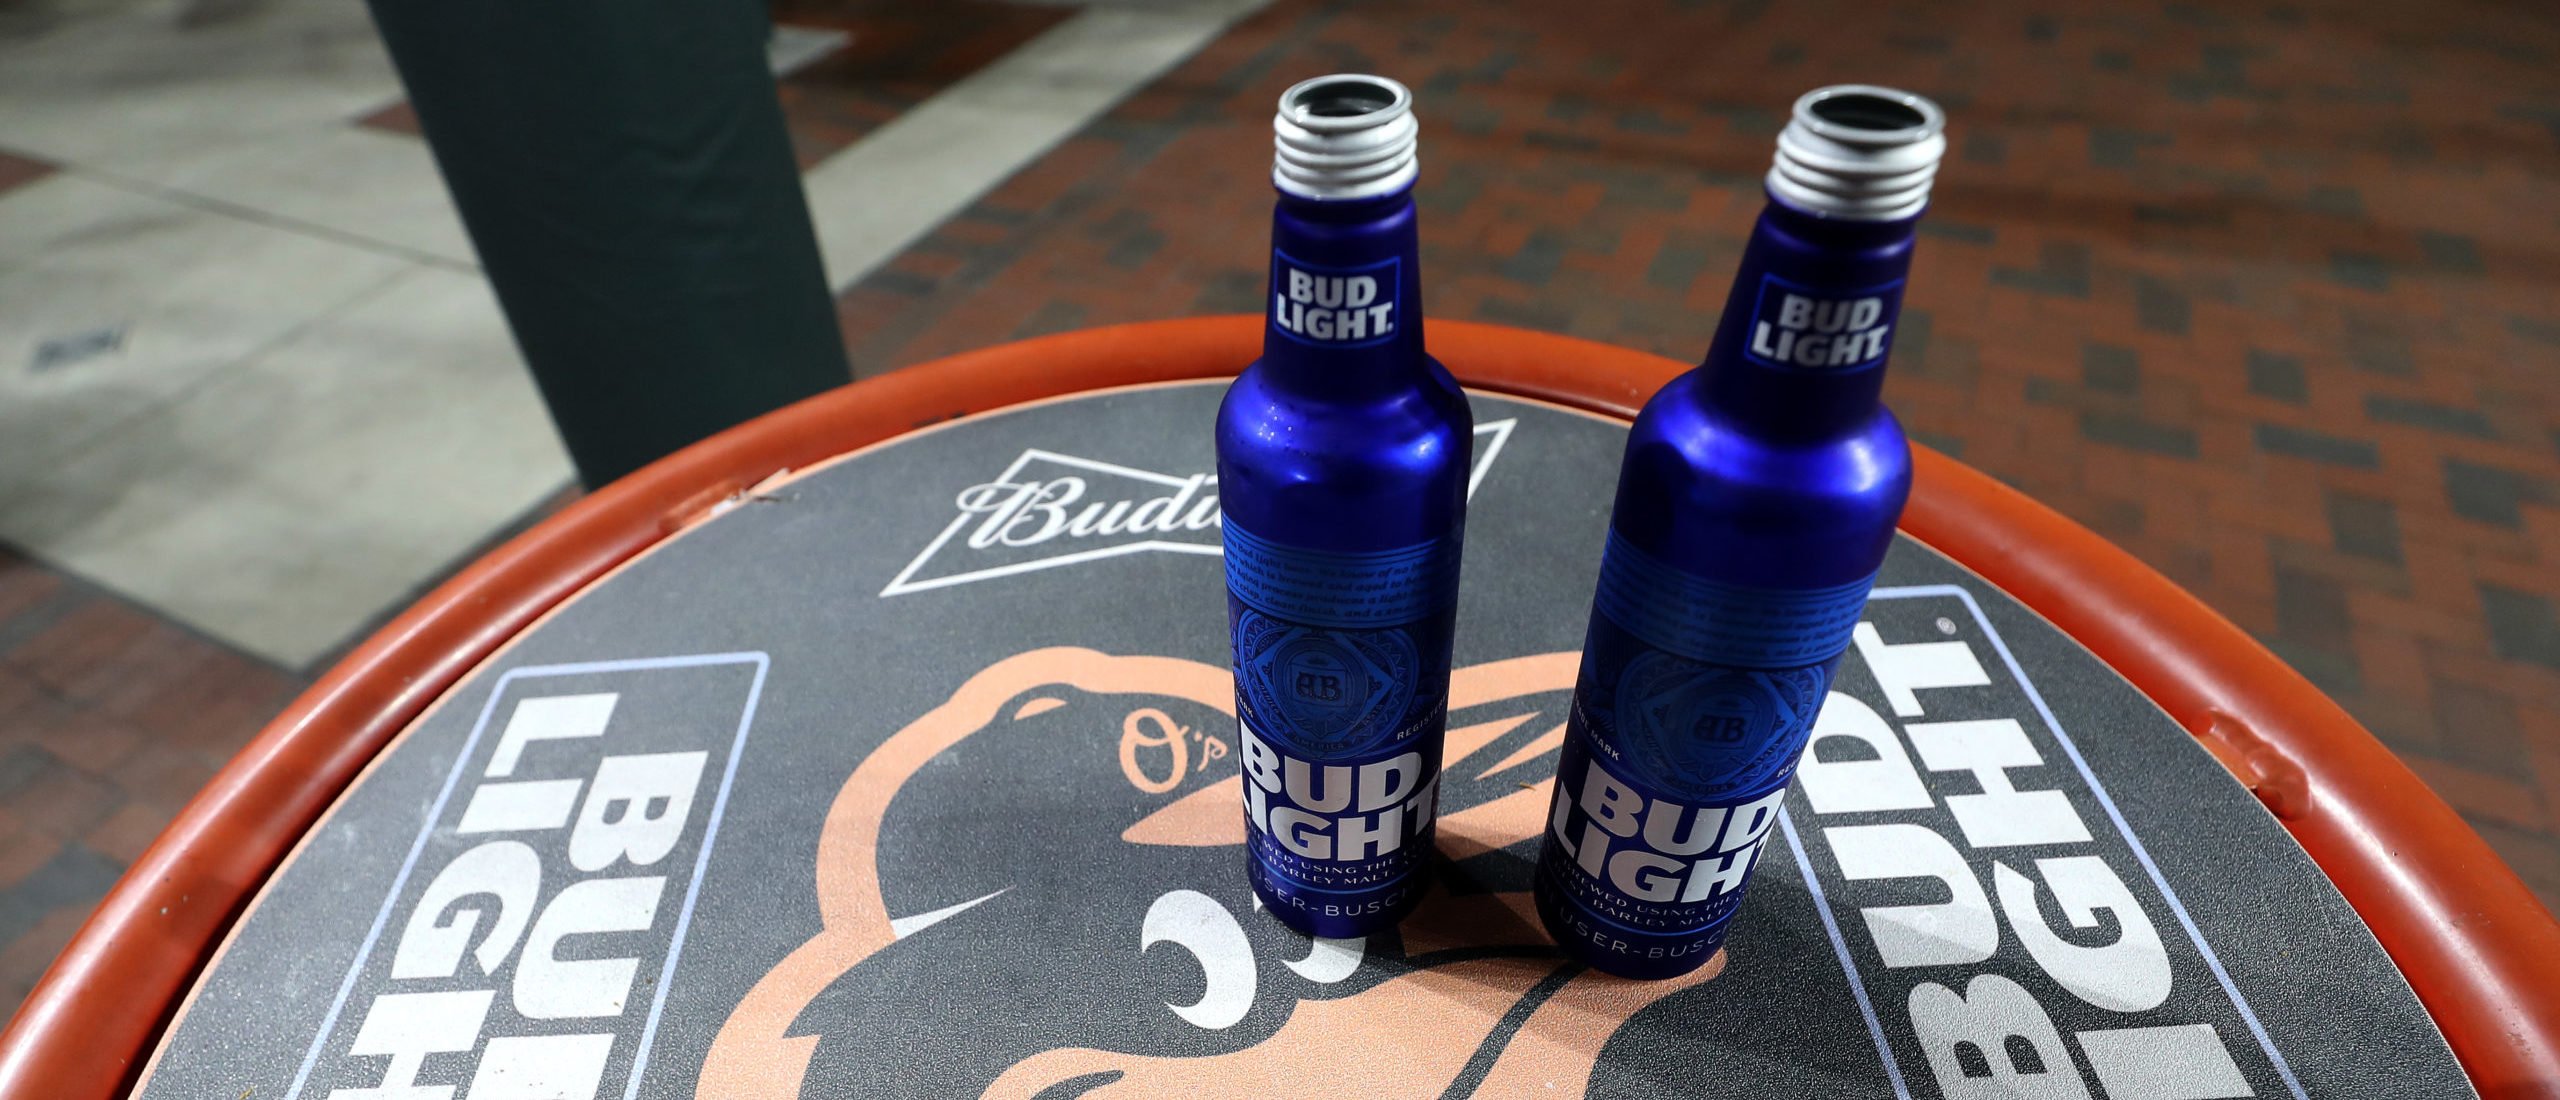 bud-light-to-launch-biggest-summer-campaign-ever-amid-ongoing-conservative-outrage-tanking